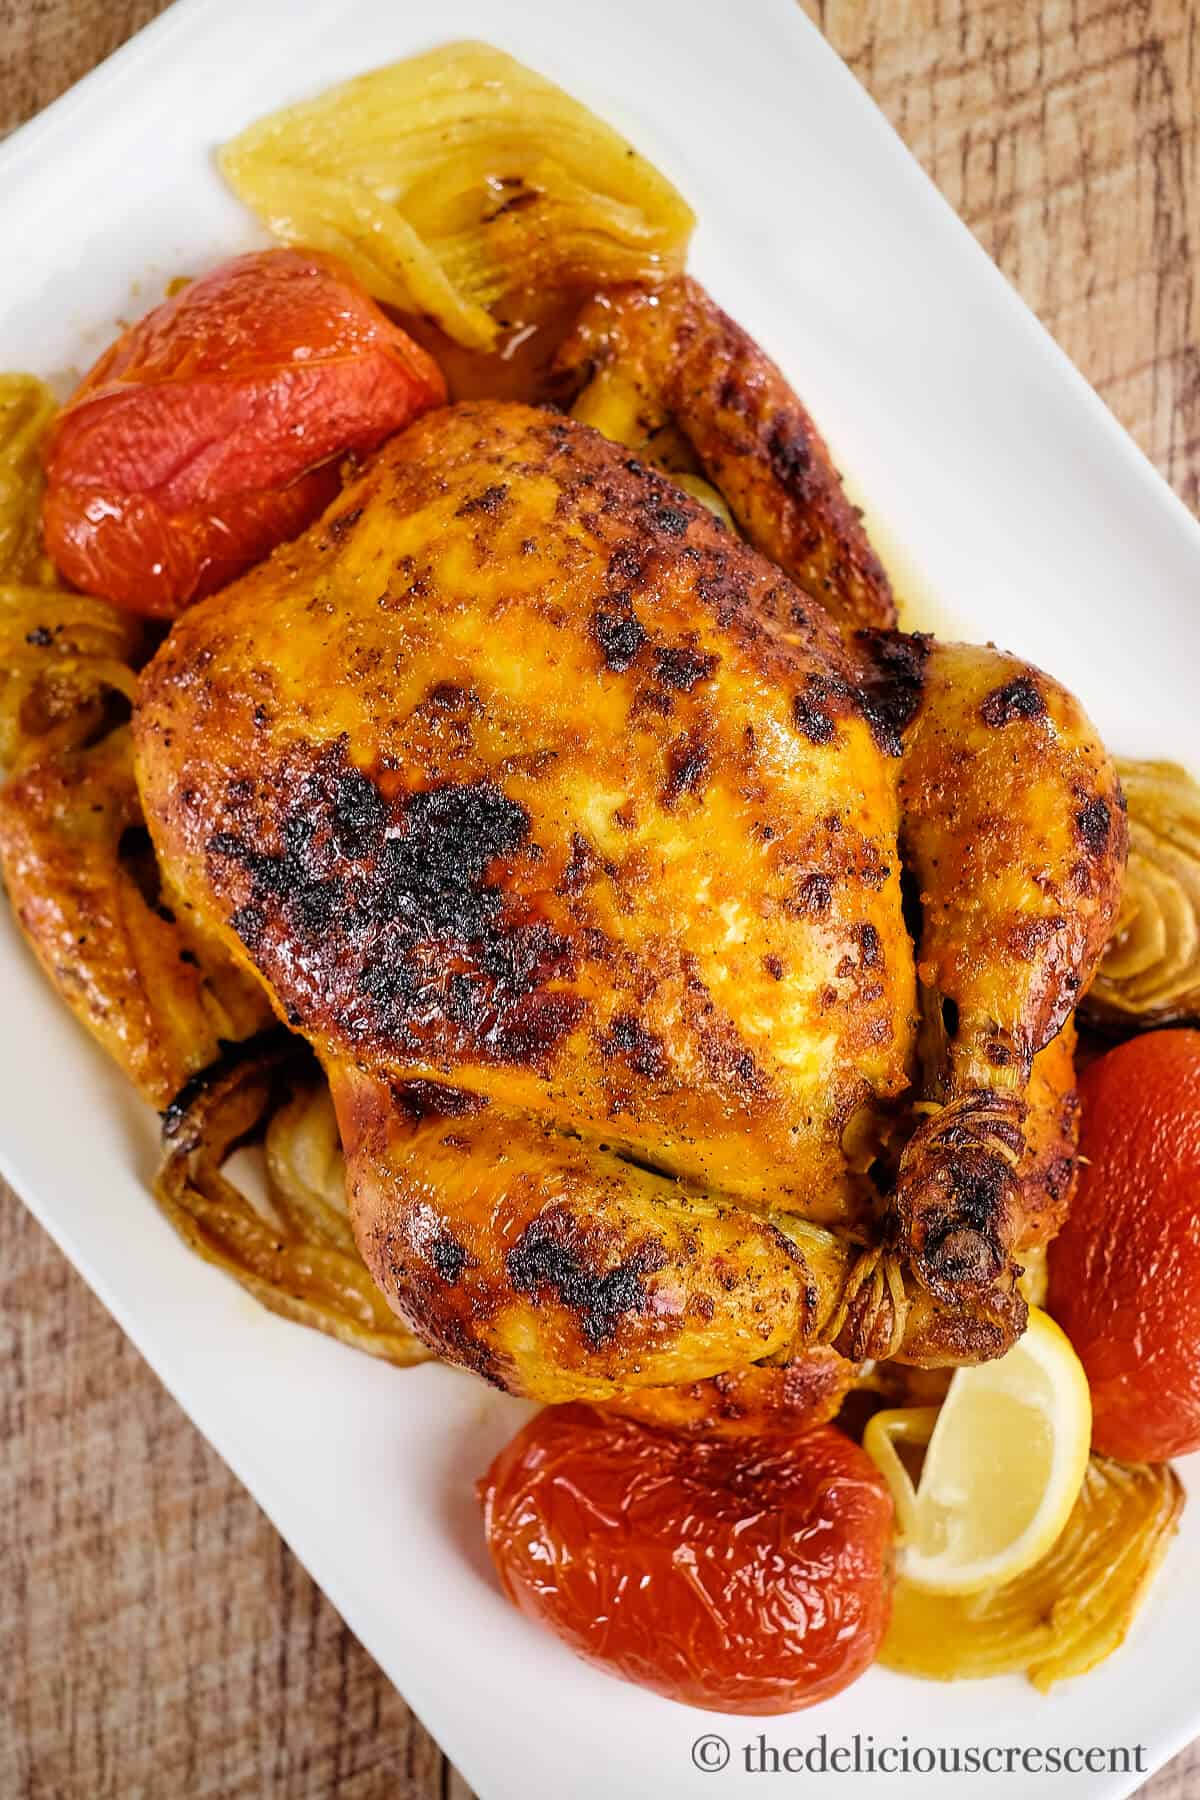 Saffron chicken served with roasted vegetables on a white plate.